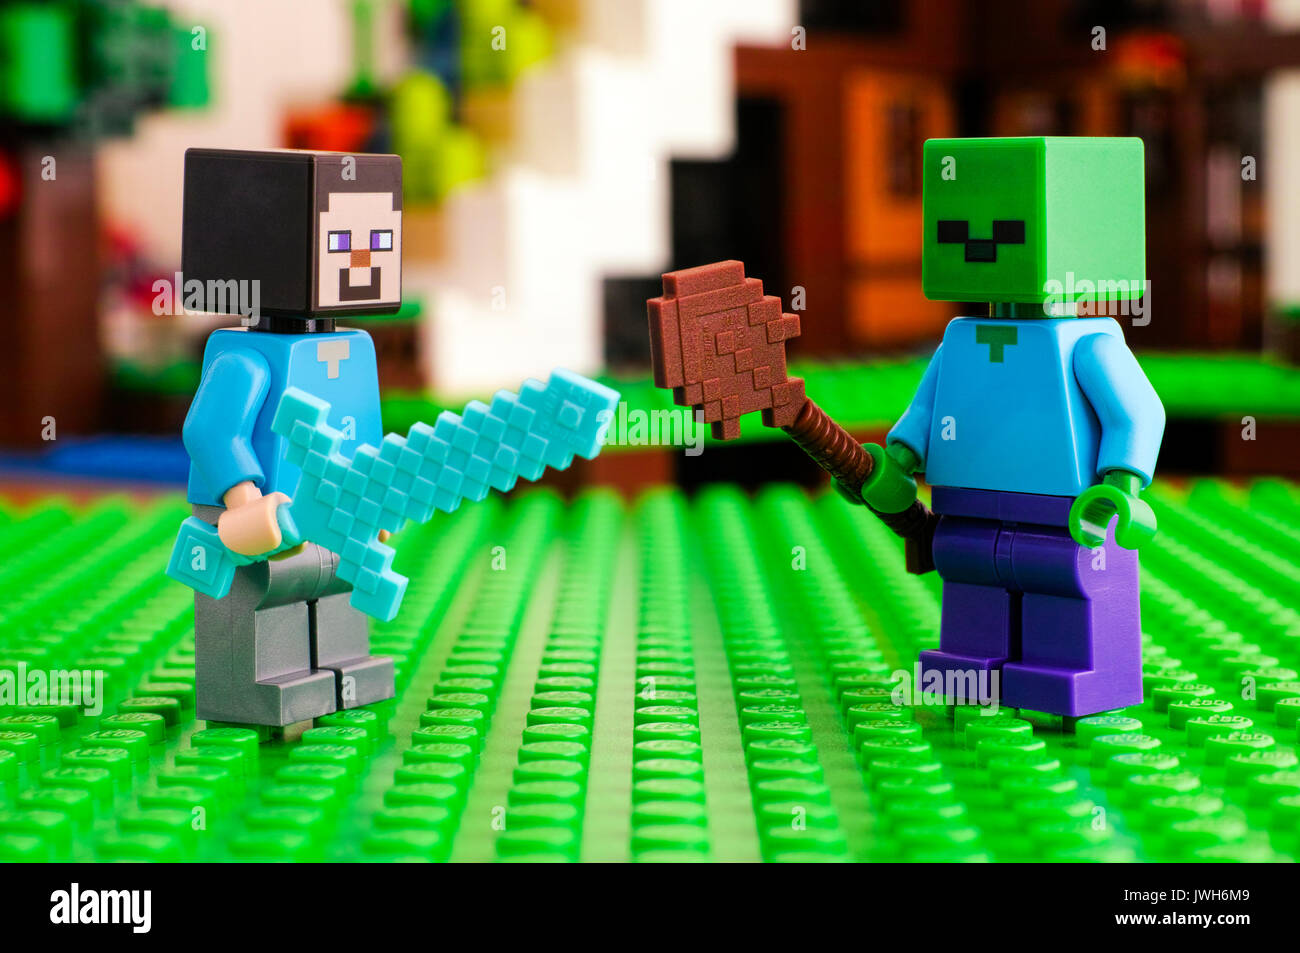 Lego Minecraft High Resolution Stock Photography and Images - Alamy